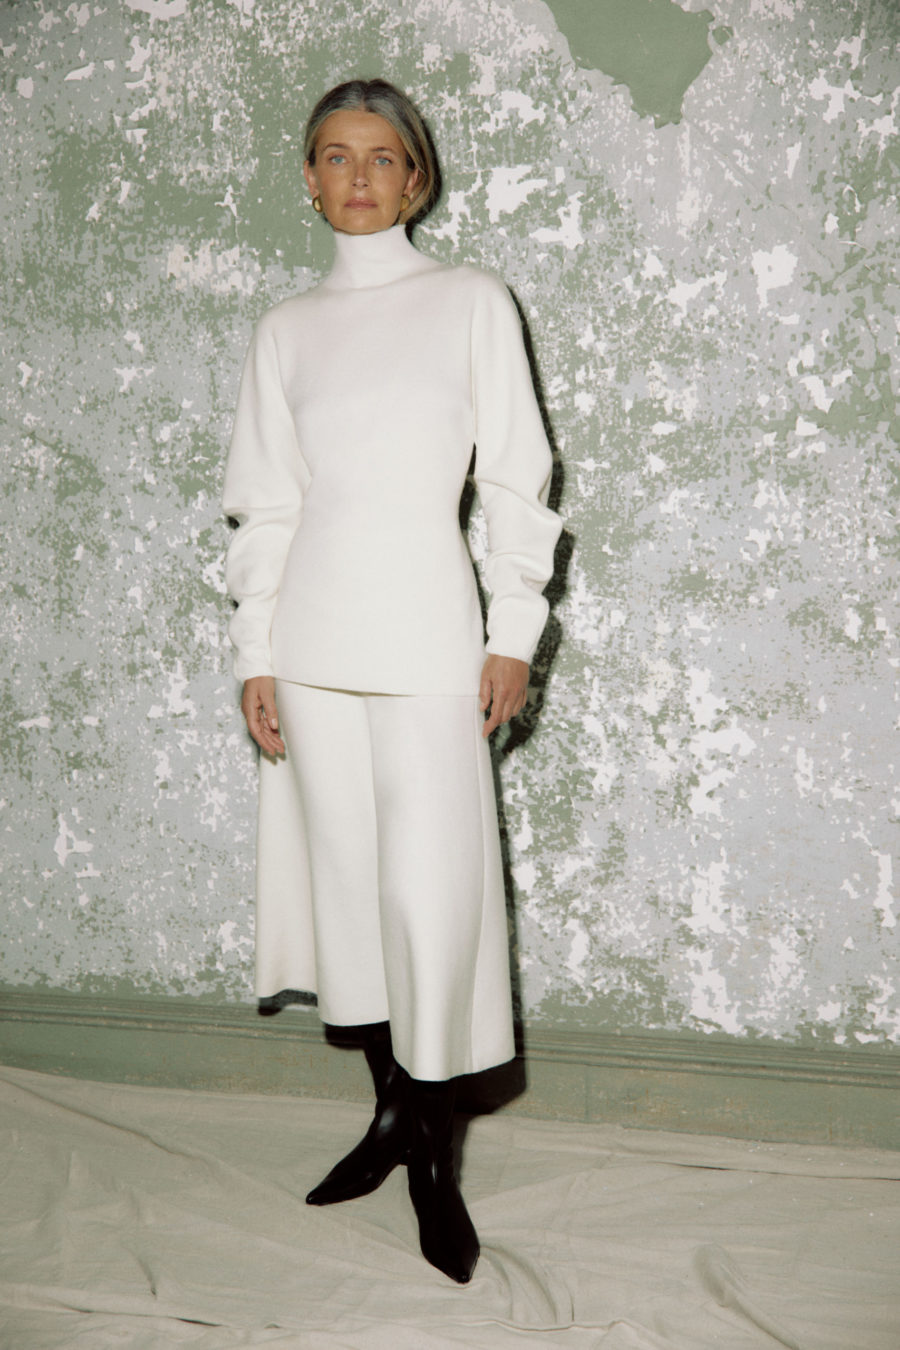 Woman wearing white turtleneck and skirt